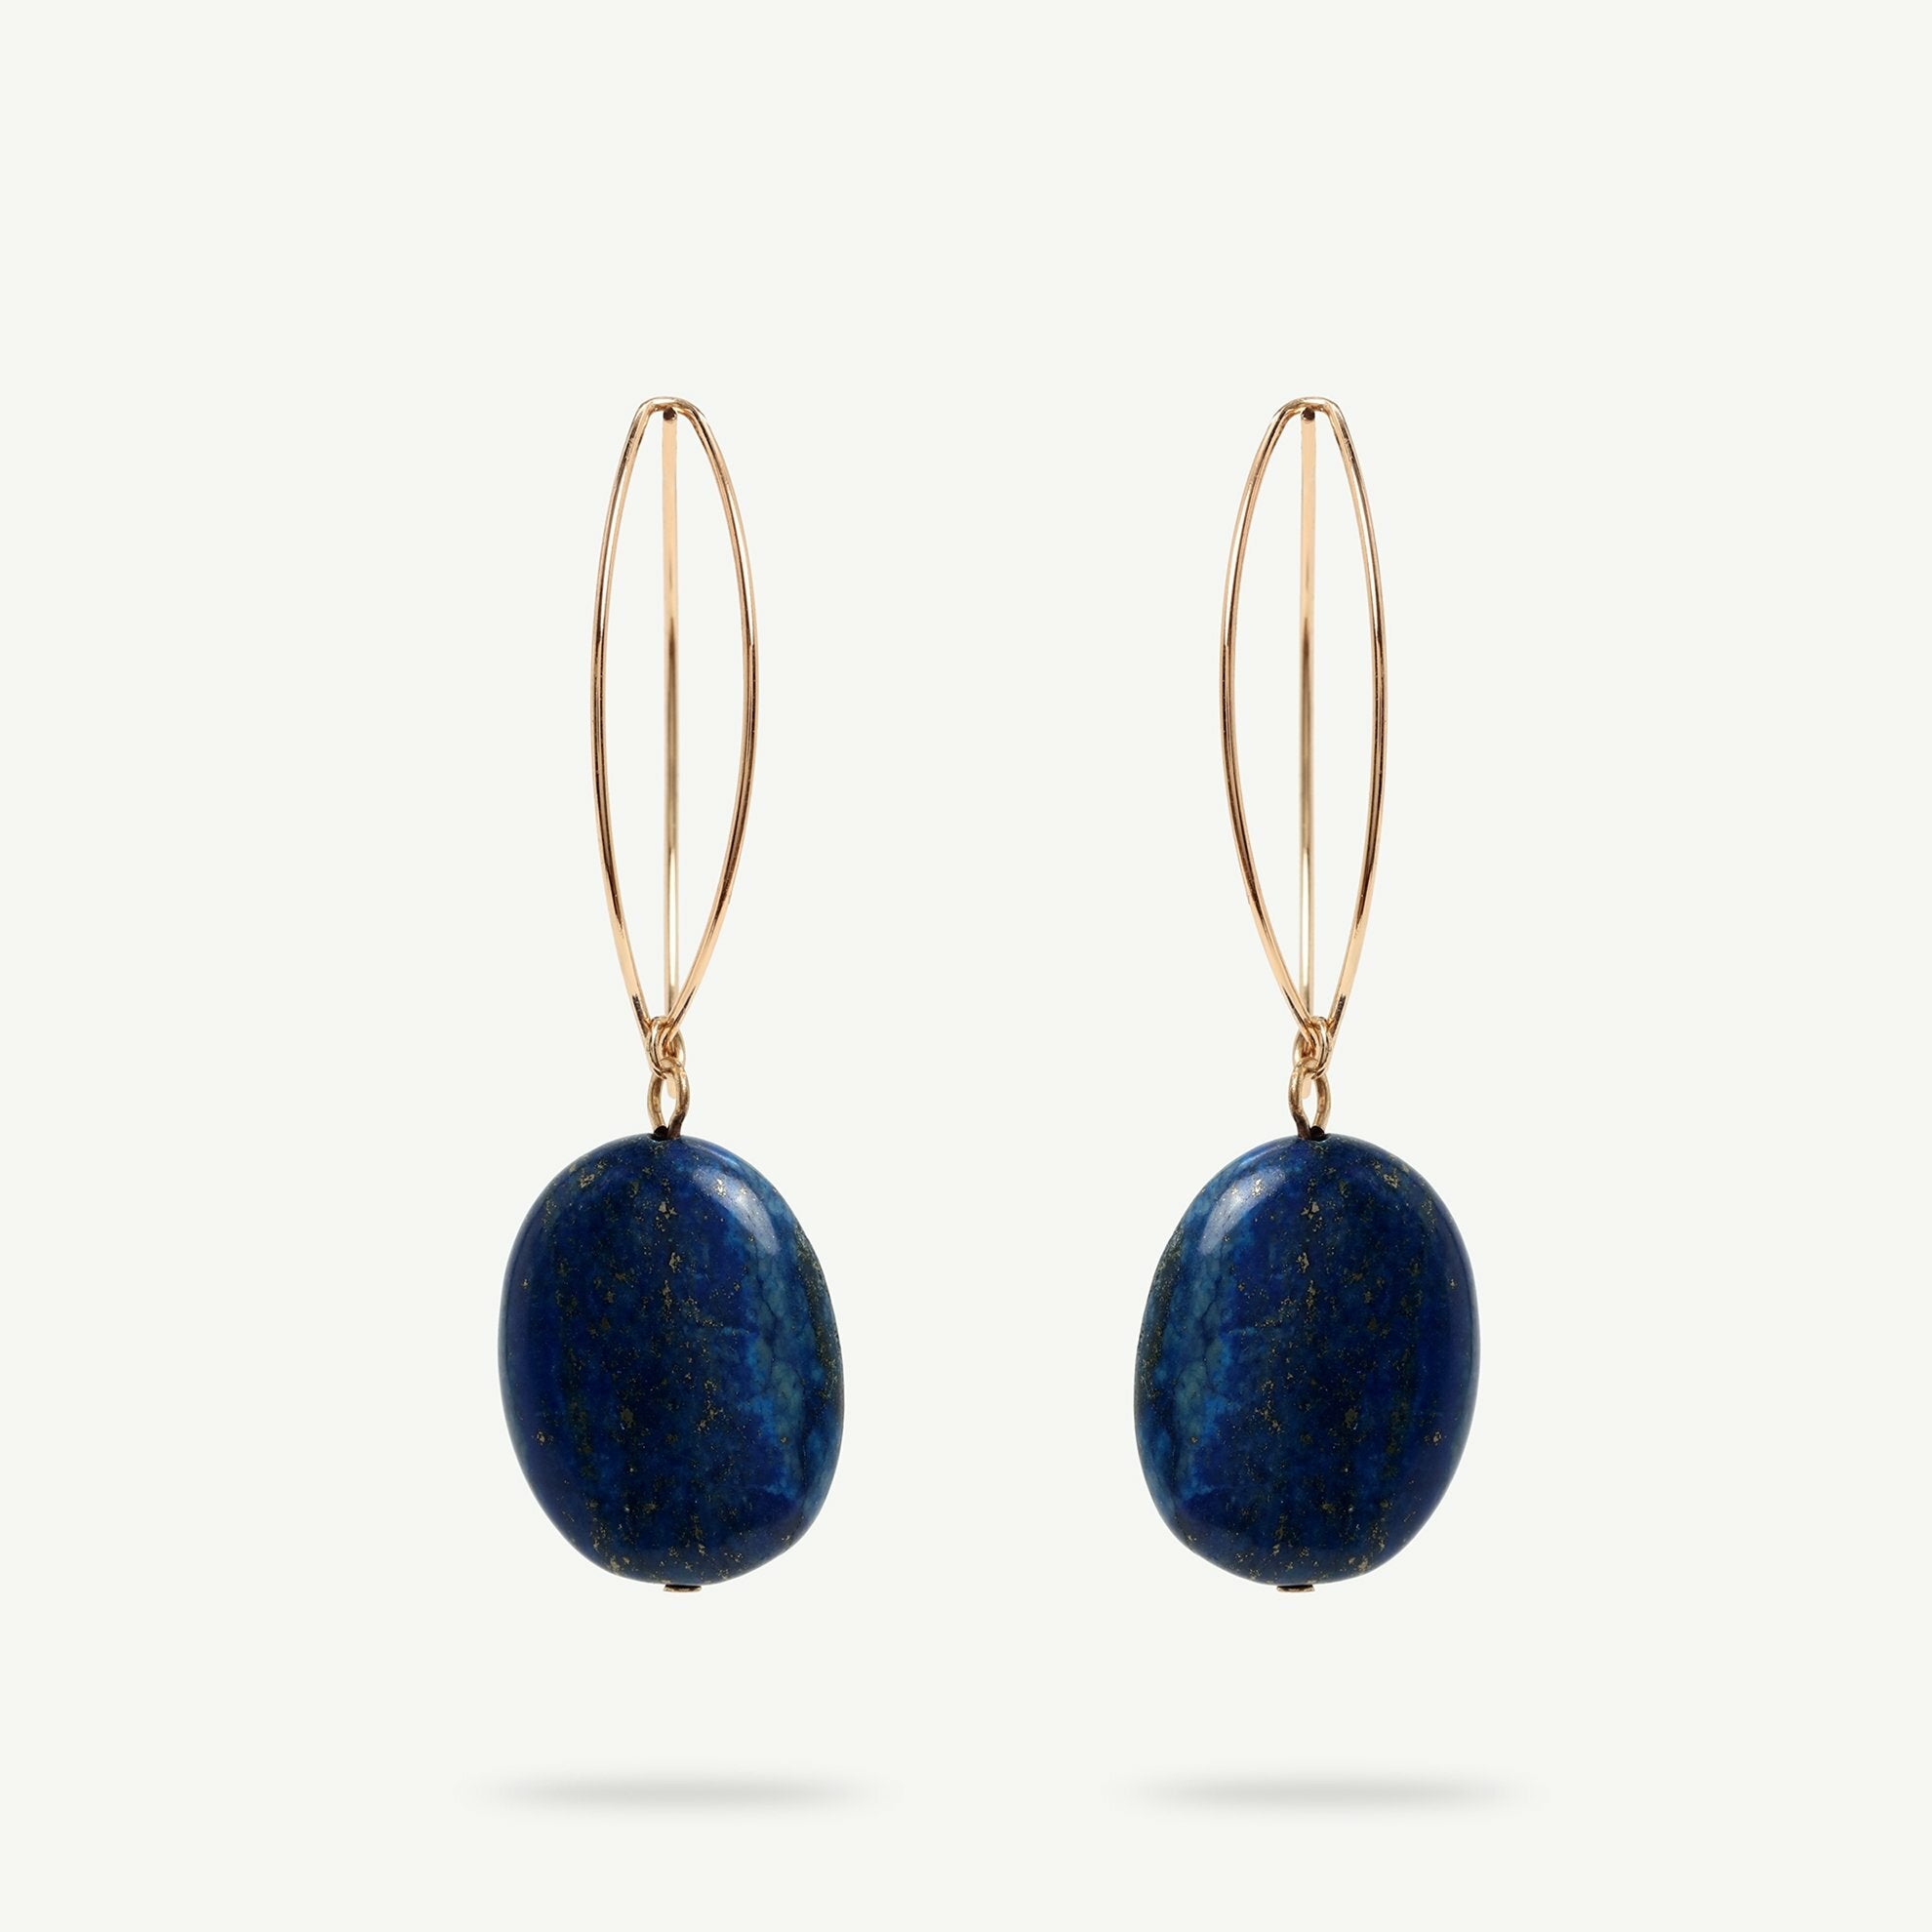 Navy blue natural stone pendant earrings. The stone is attached to a brass metal part.